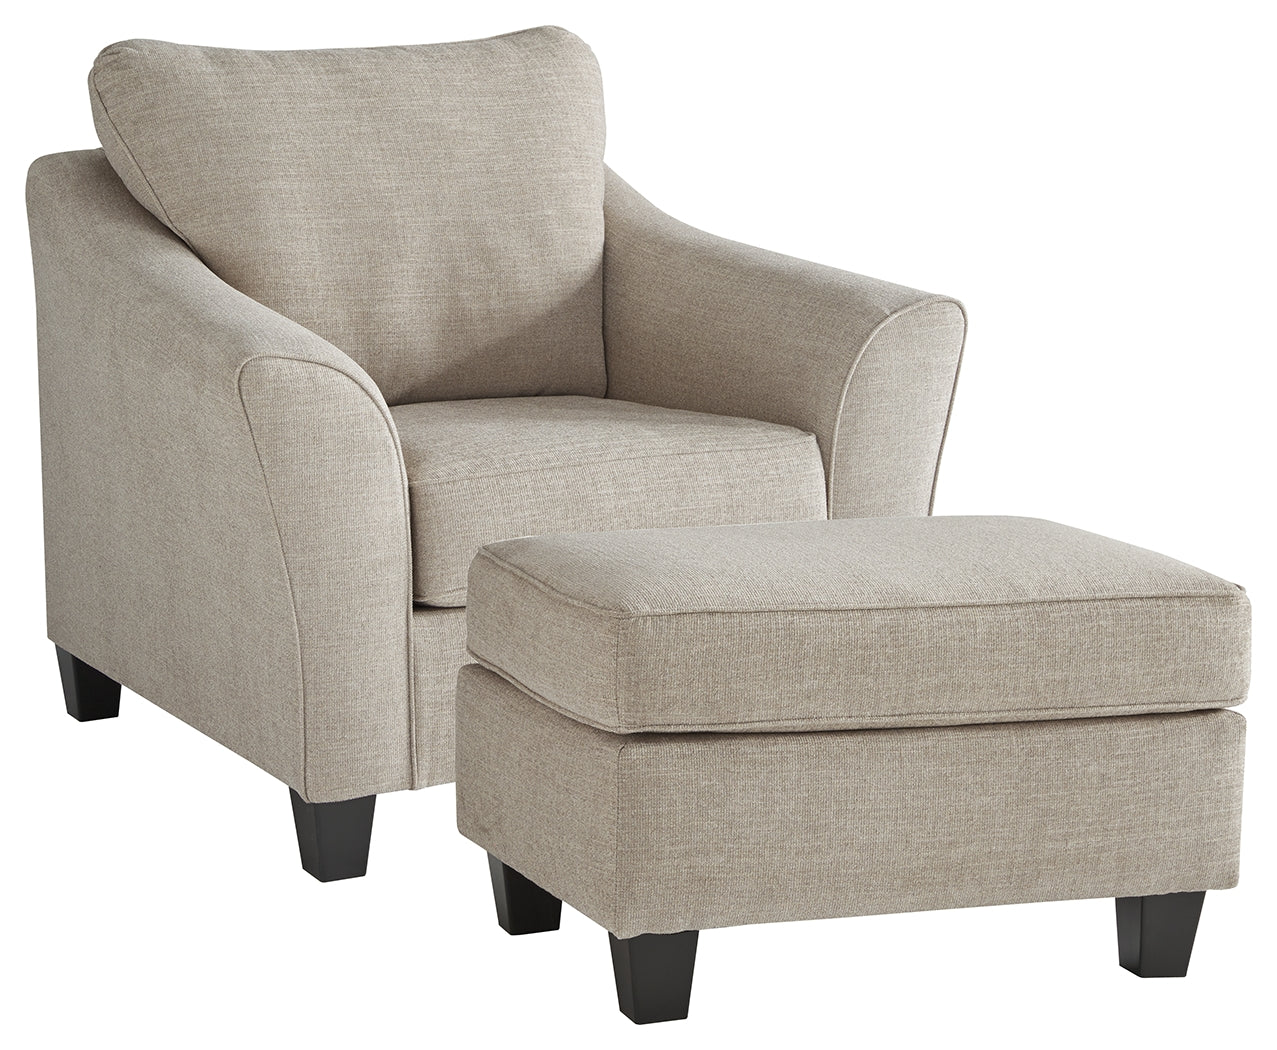 Abney Benchcraft 2-Piece Chair and Ottoman Set